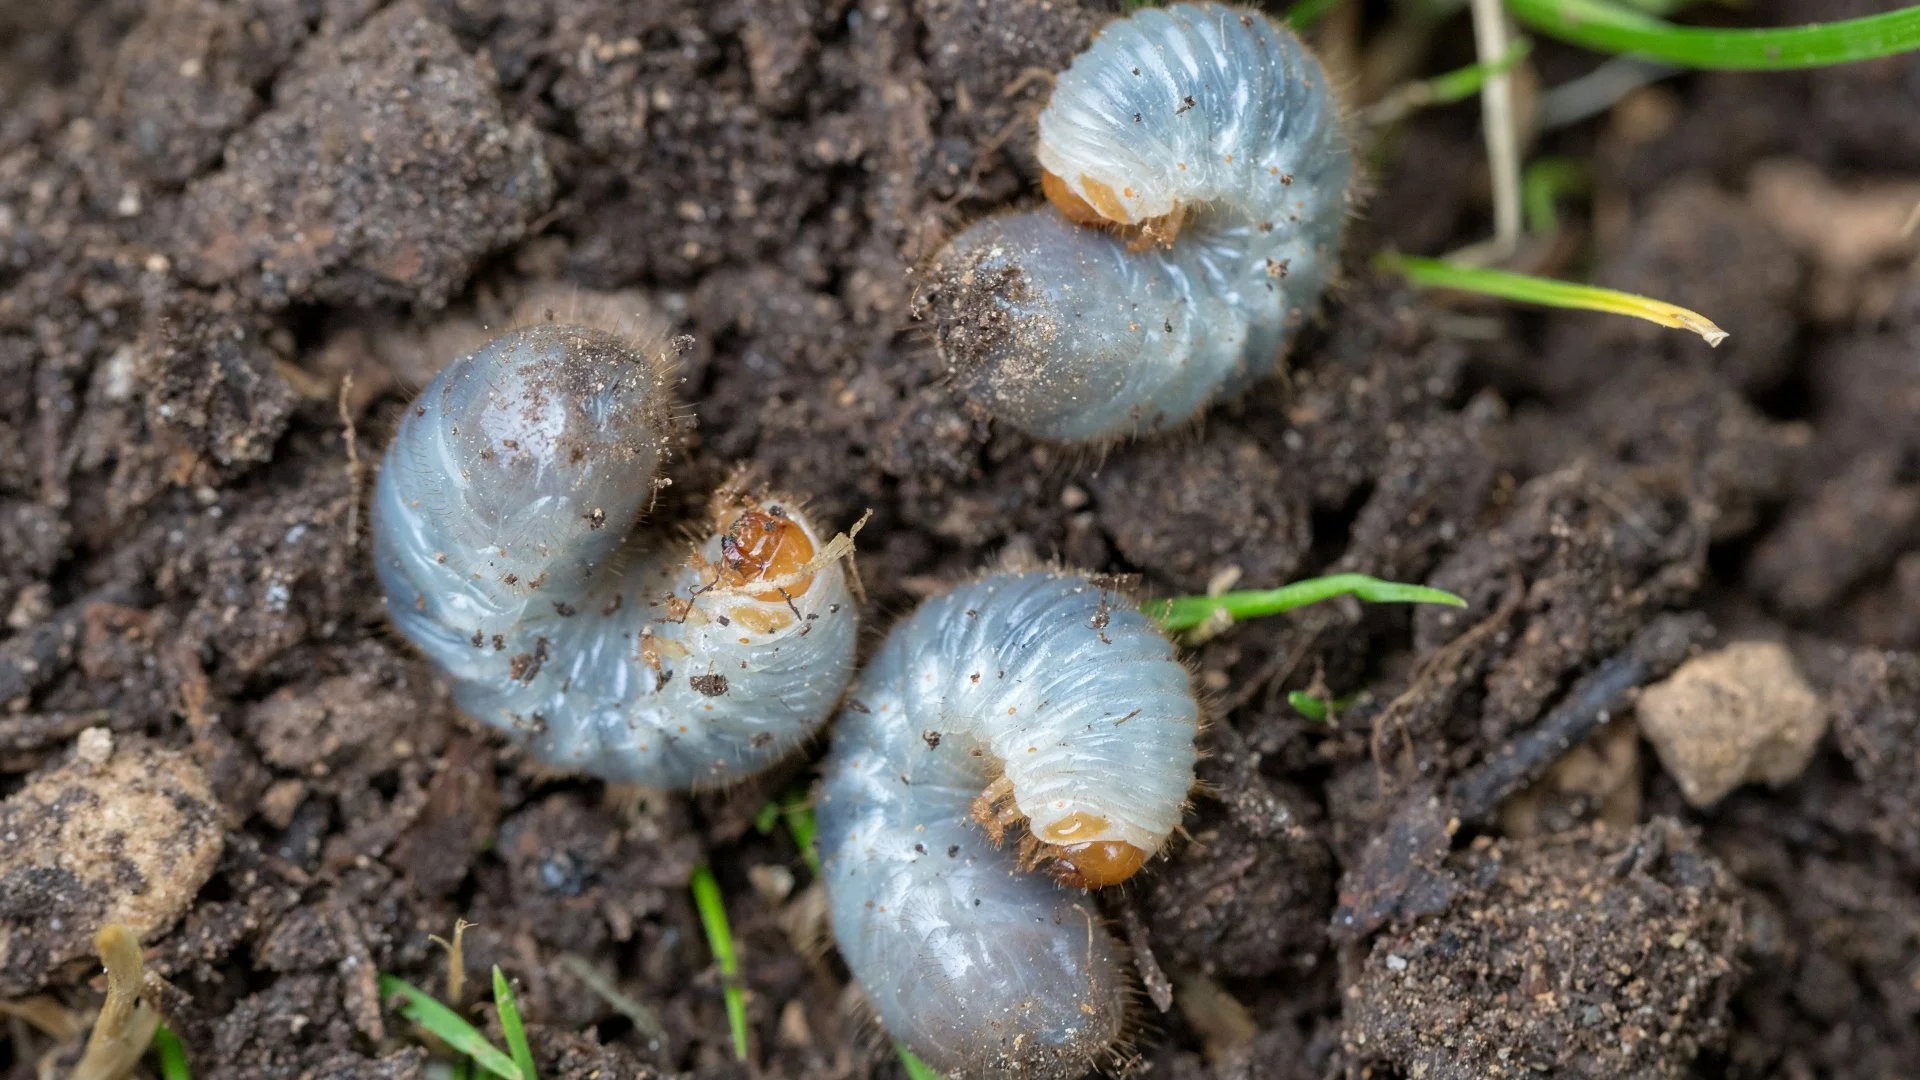 Grubs vs Chinch Bugs - How to Tell Which Lawn Insect Has Infested Your Turf